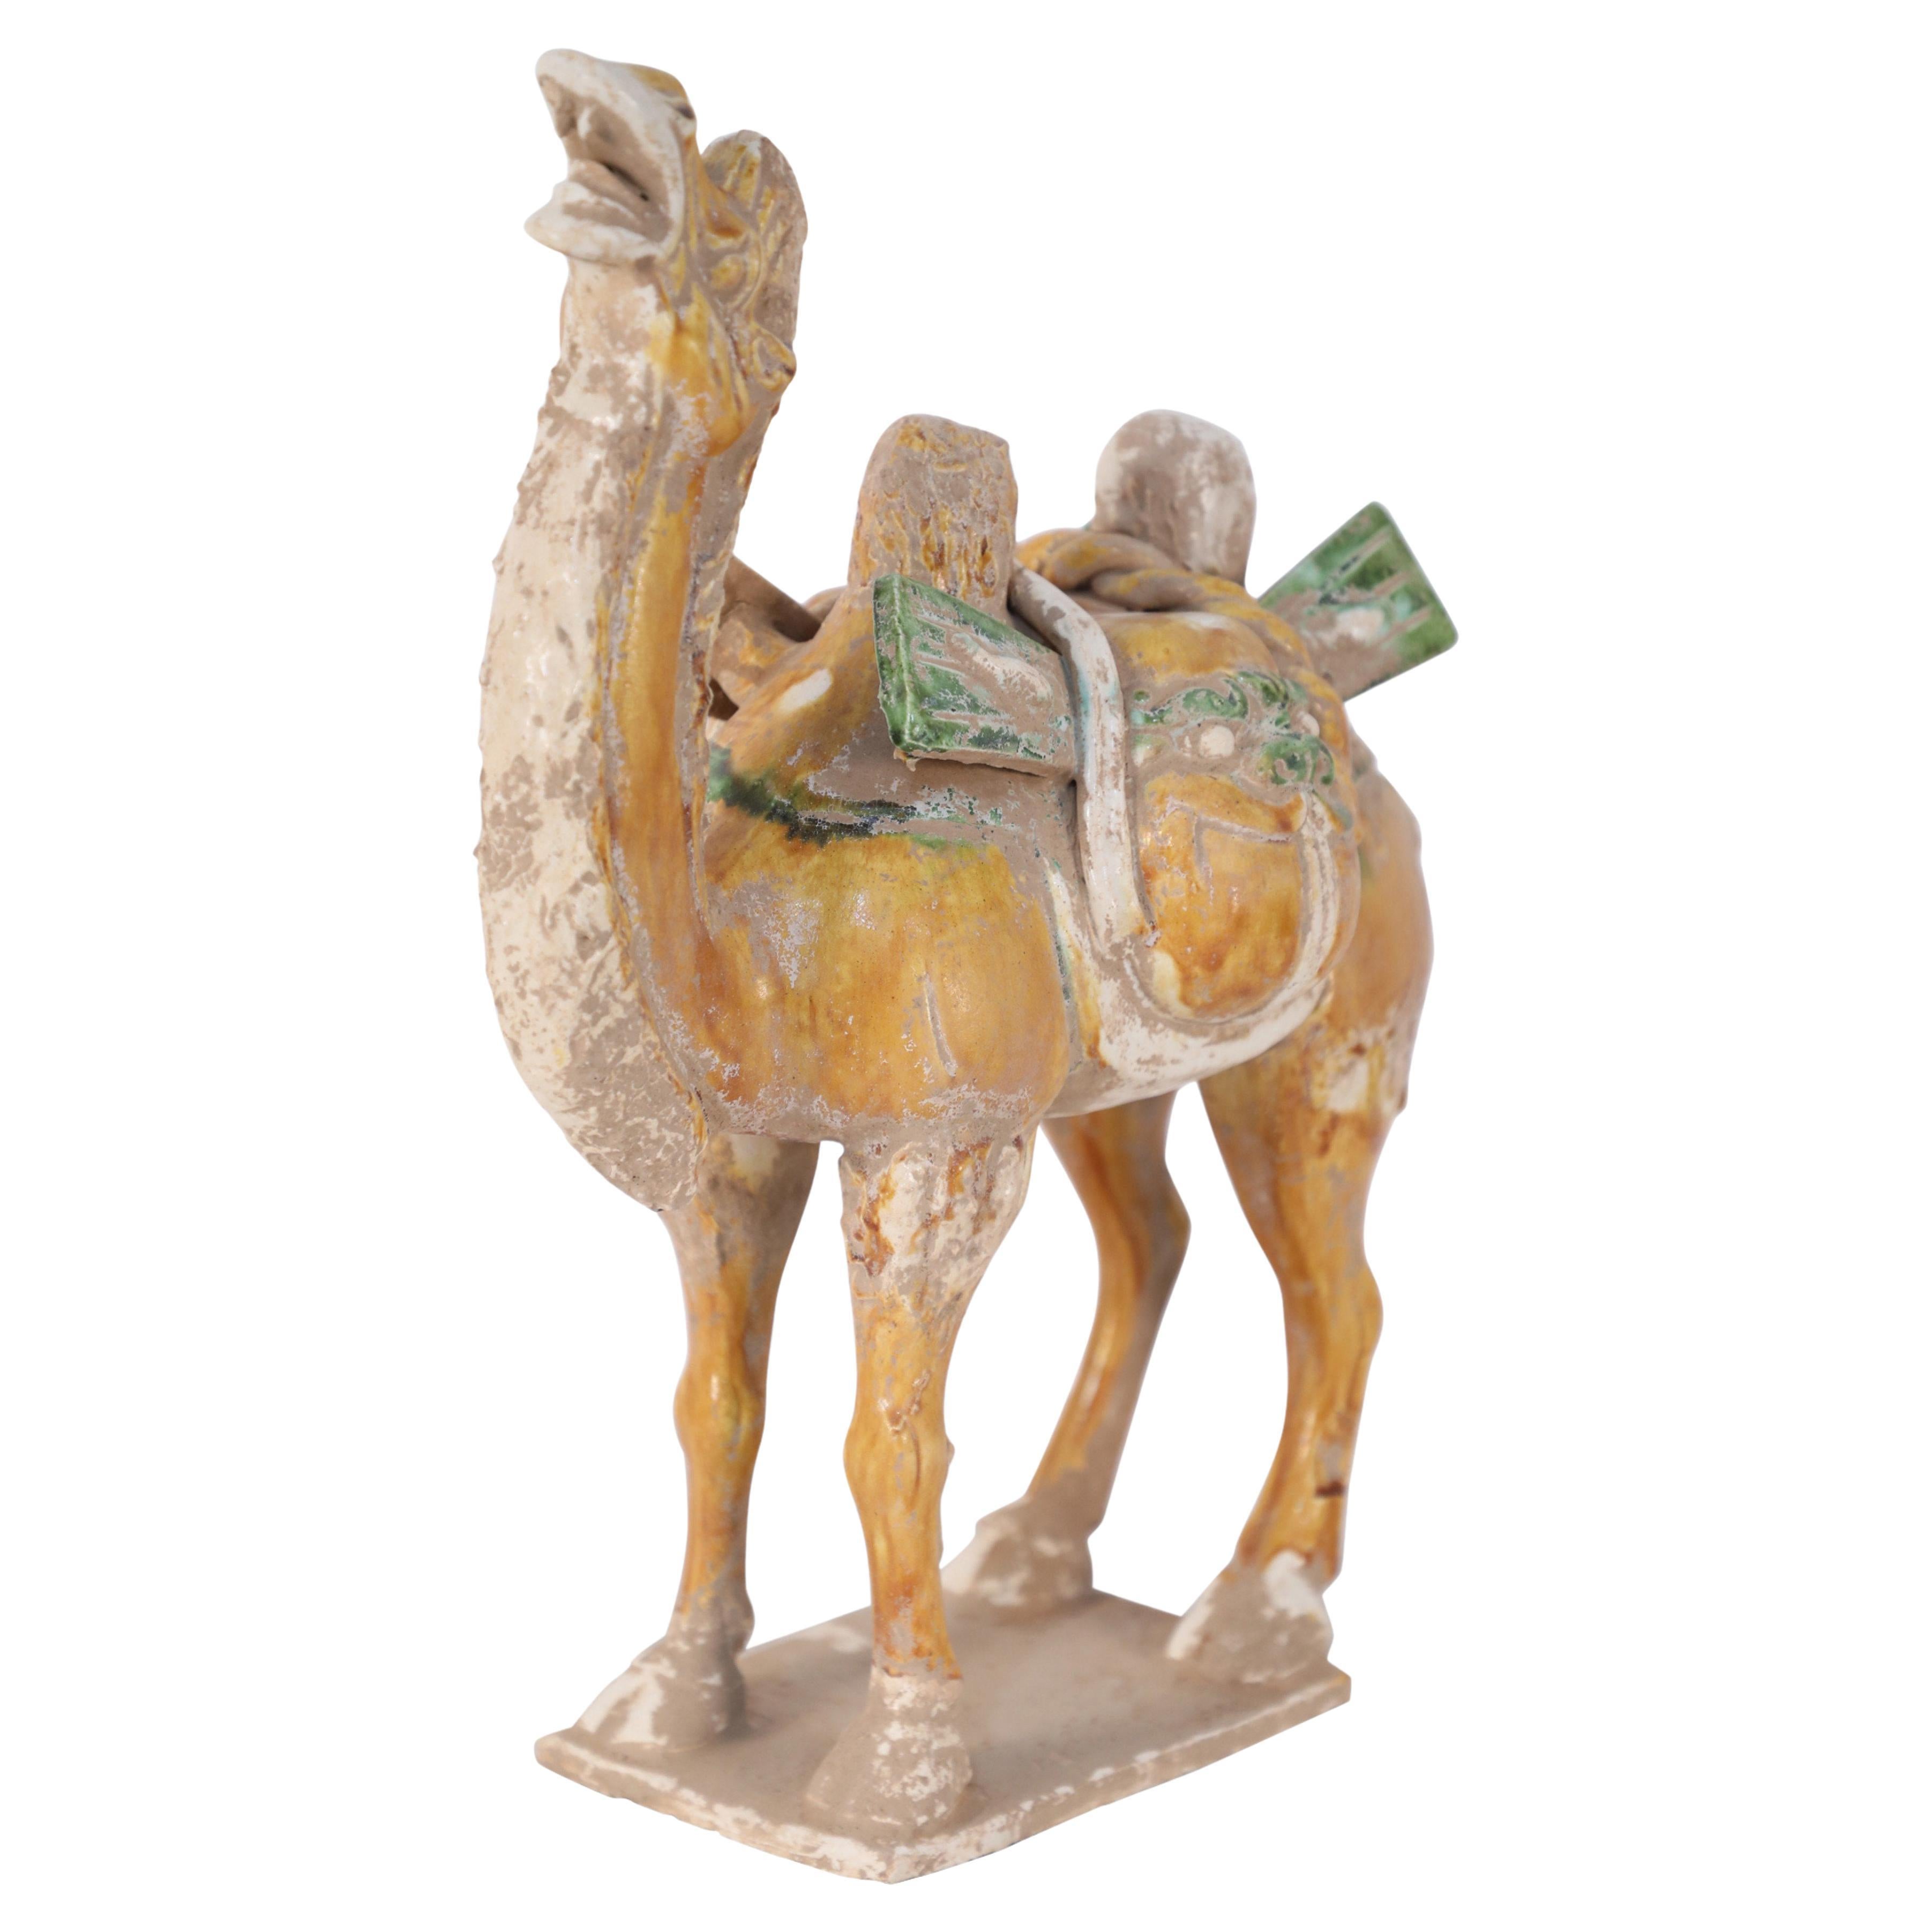 Chinese Tang Dynasty-Style Sancai Glazed Terra Cotta Camel Tomb Figure For Sale